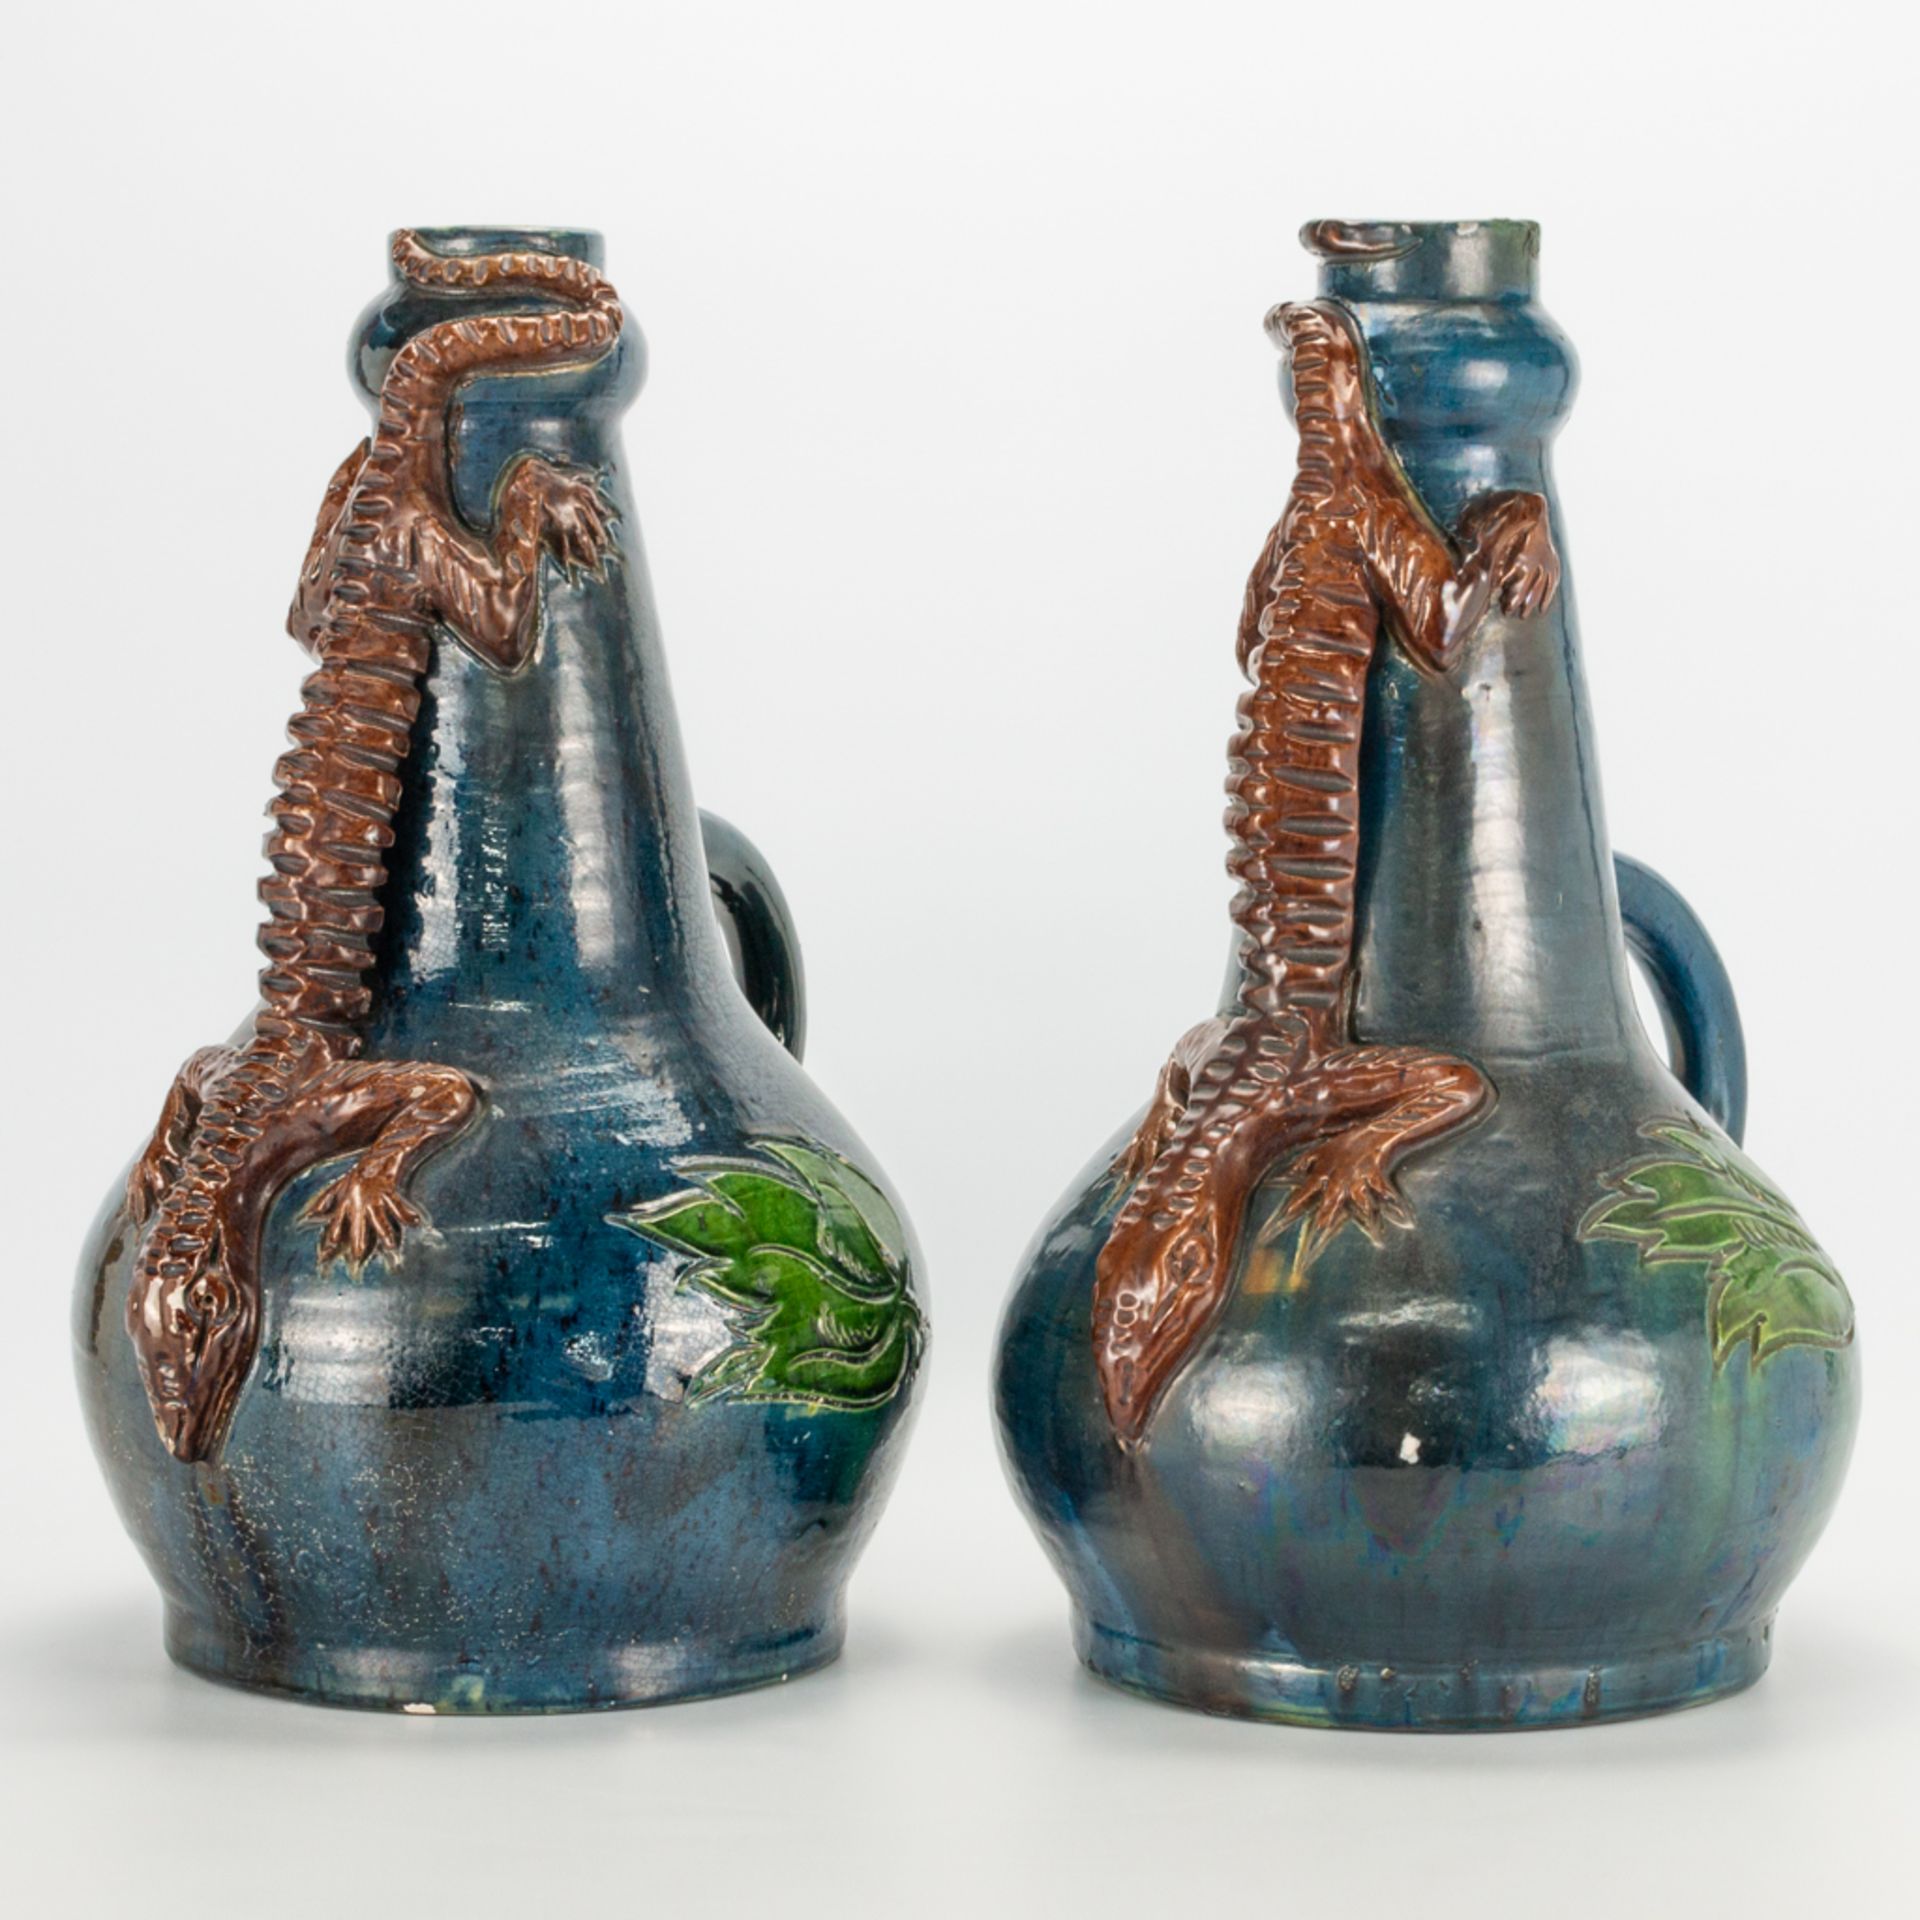 A pair of vases made in Flemish Earthenware with the decor of a salamander. (27 x 30 x 45 cm) - Image 9 of 20